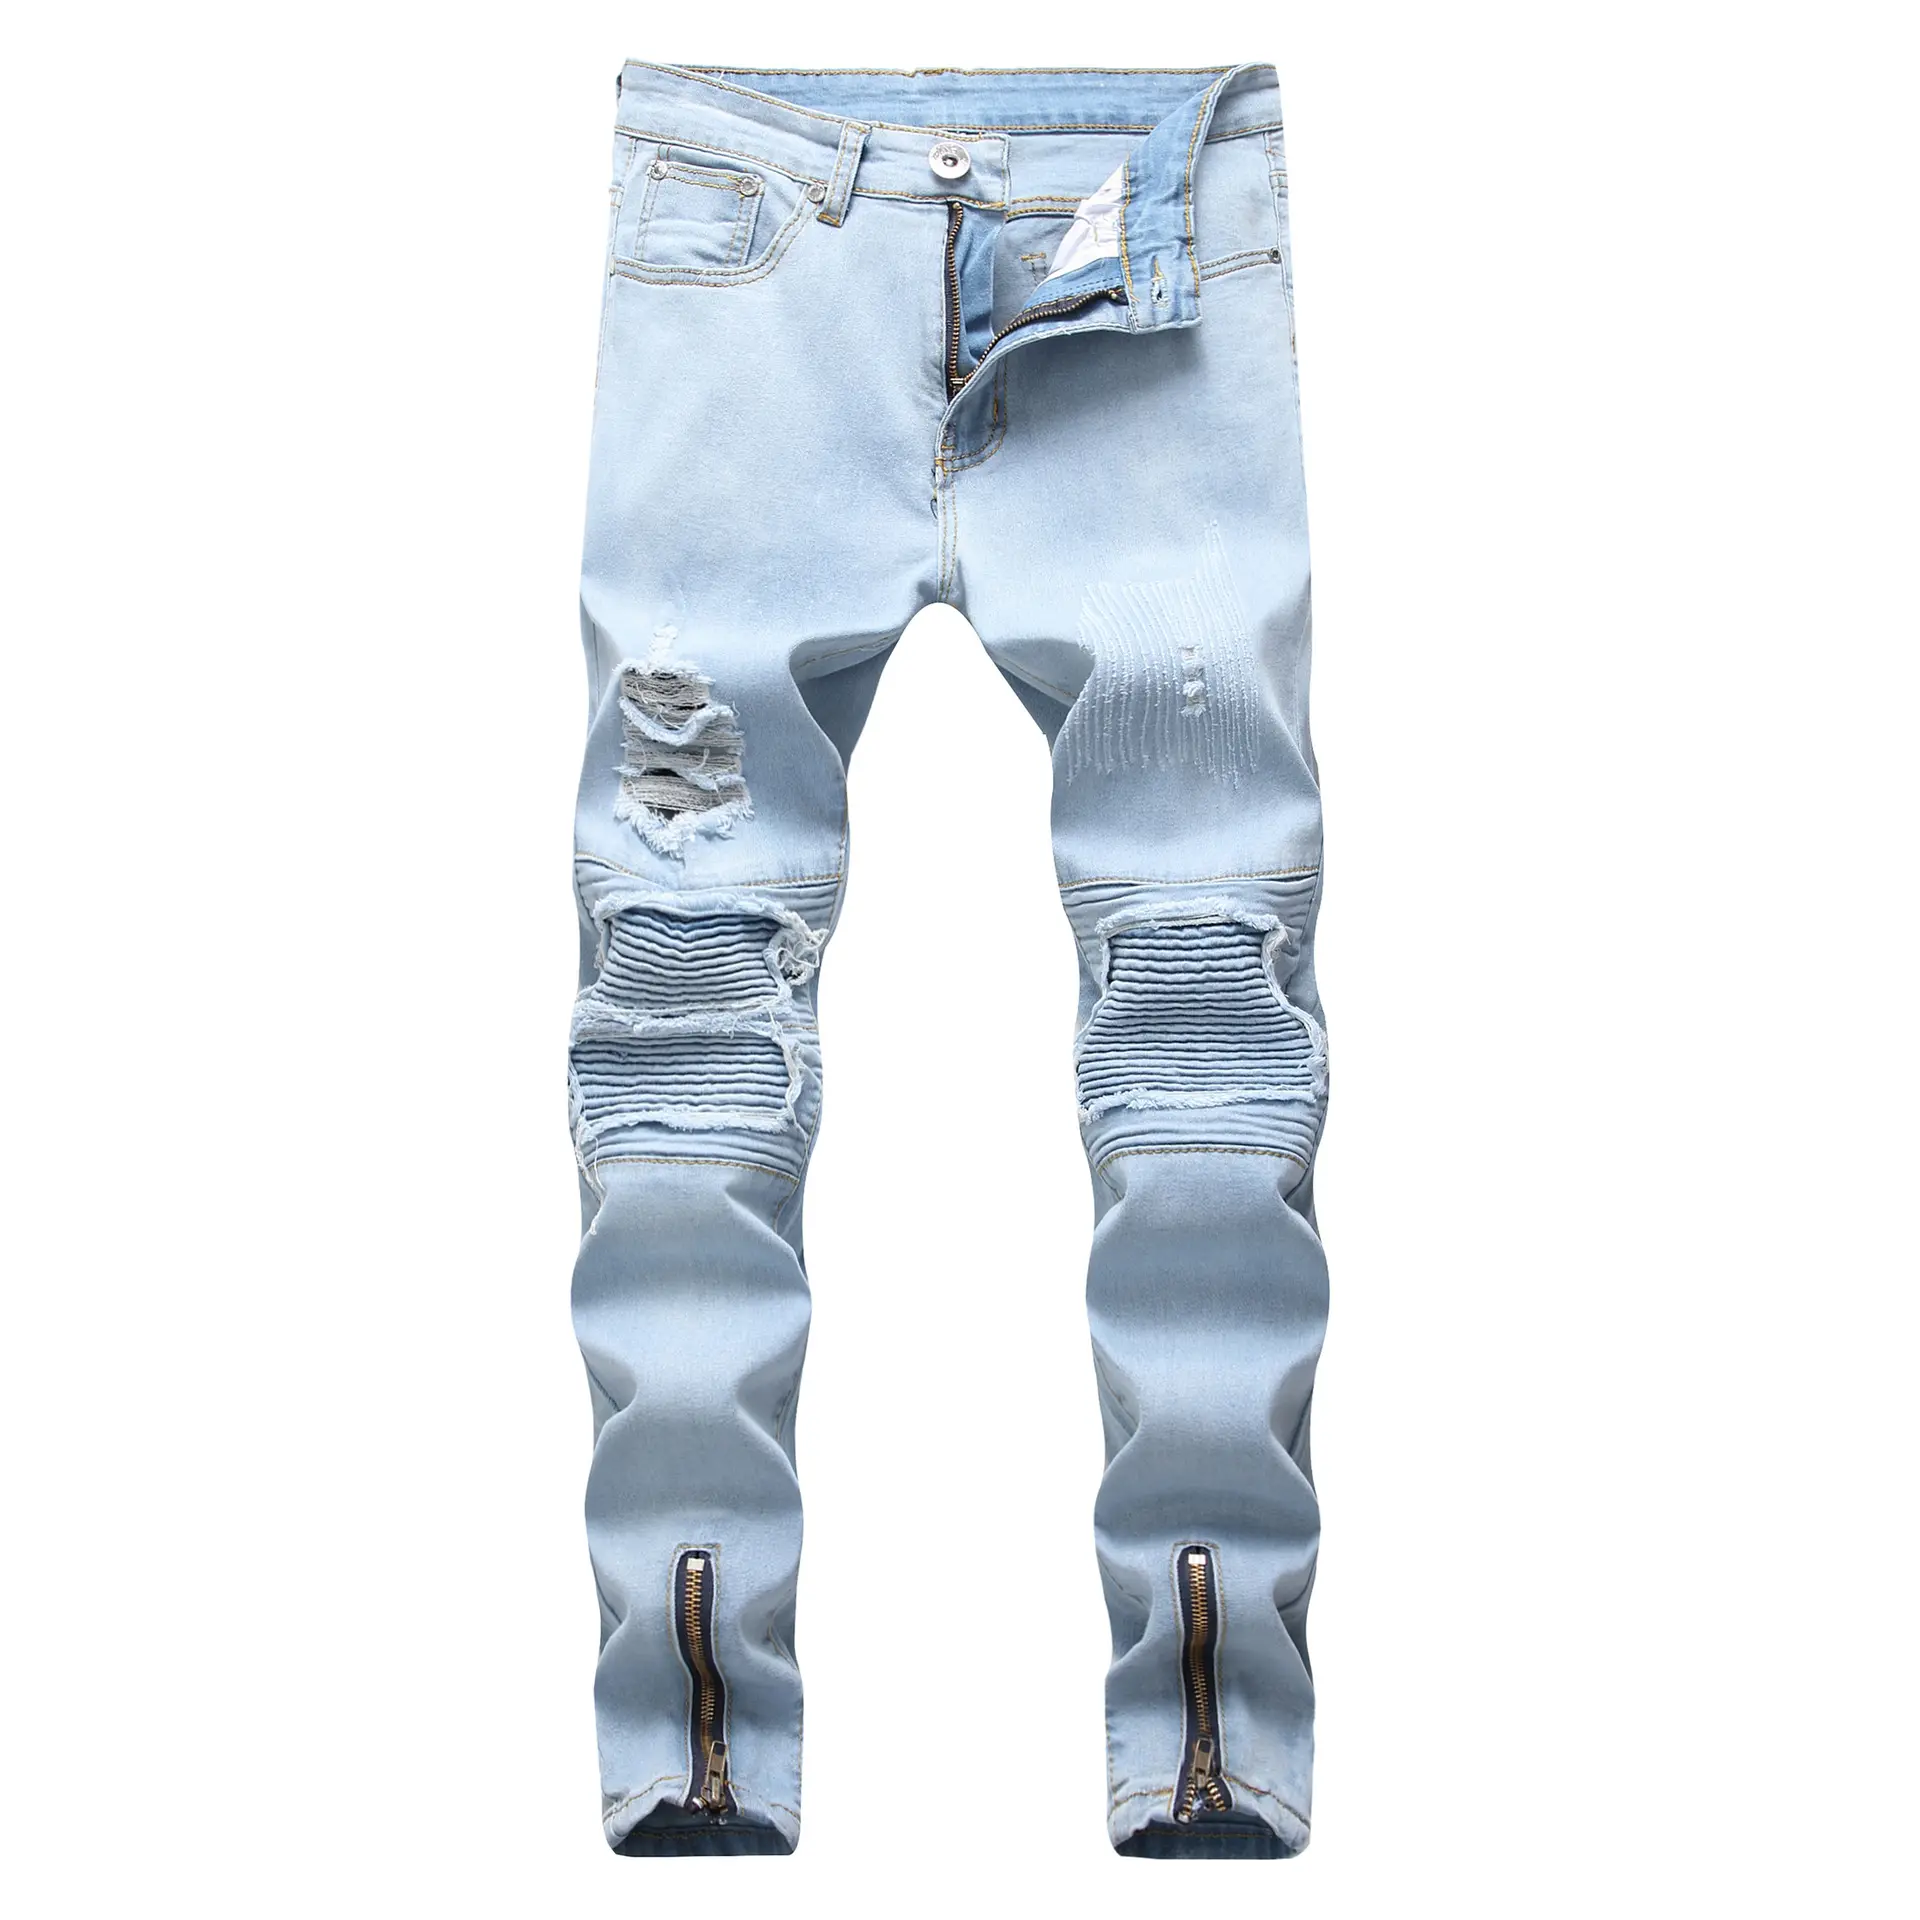 Ripped motorbike light blue slim fit casual damage jeans for men autumn